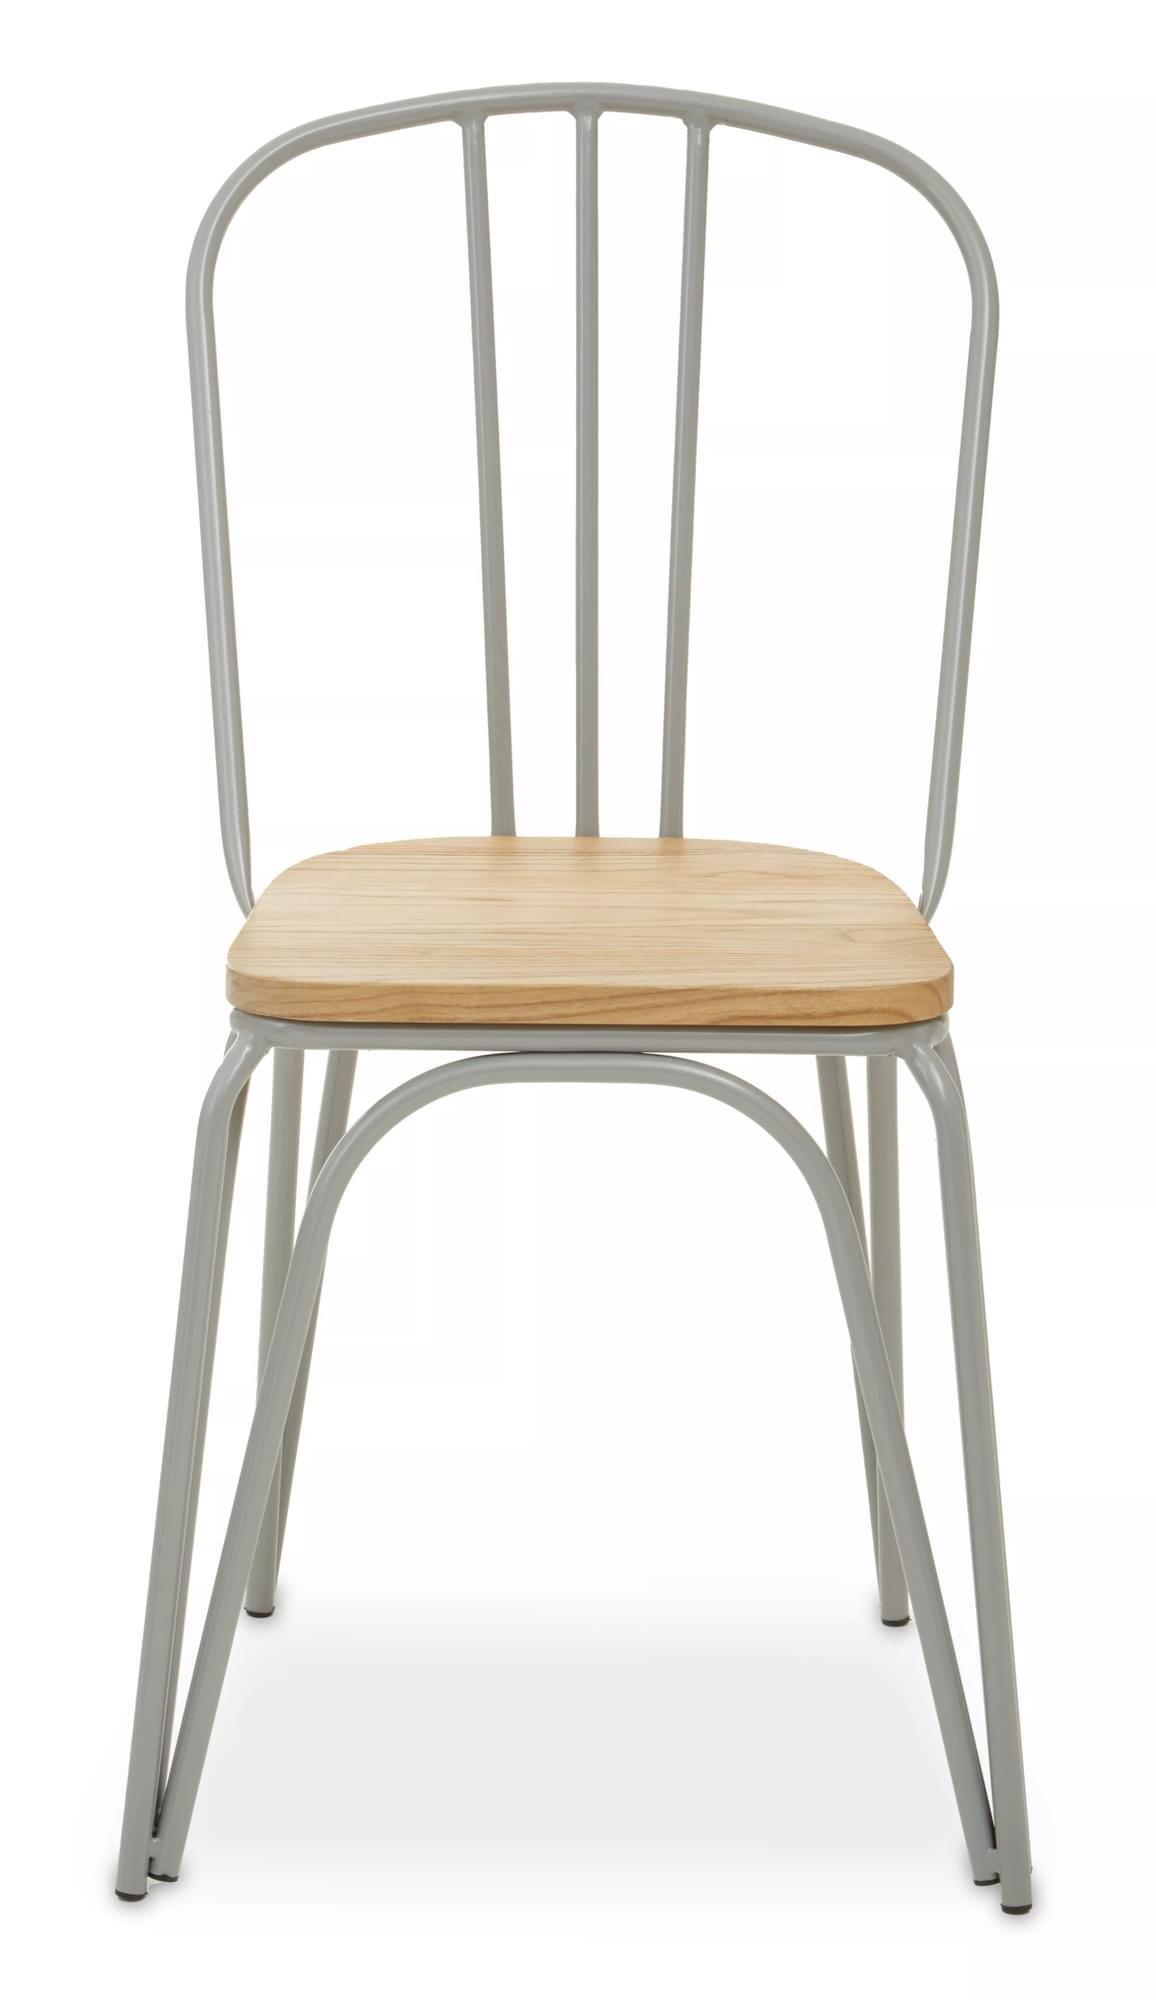 Interiors by Premier District Grey Finish Metal Frame Dining Chair